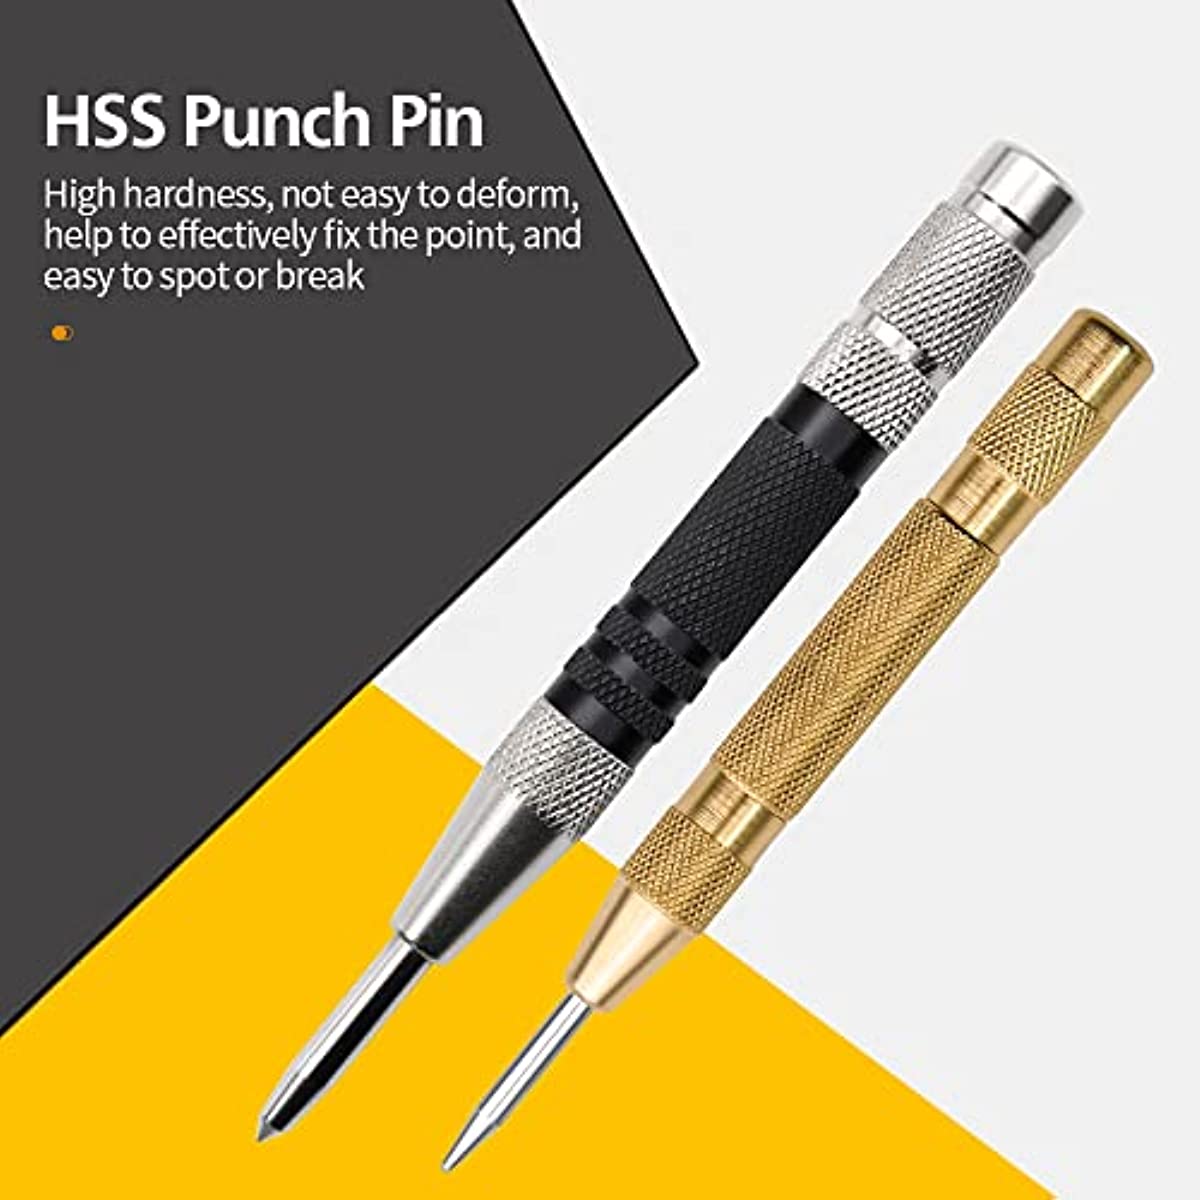 Super Strong Automatic Center Punch - 5 Inch Black Steel Spring Loaded  Center Hole Punch with Adjustable Tension, Hand Tool